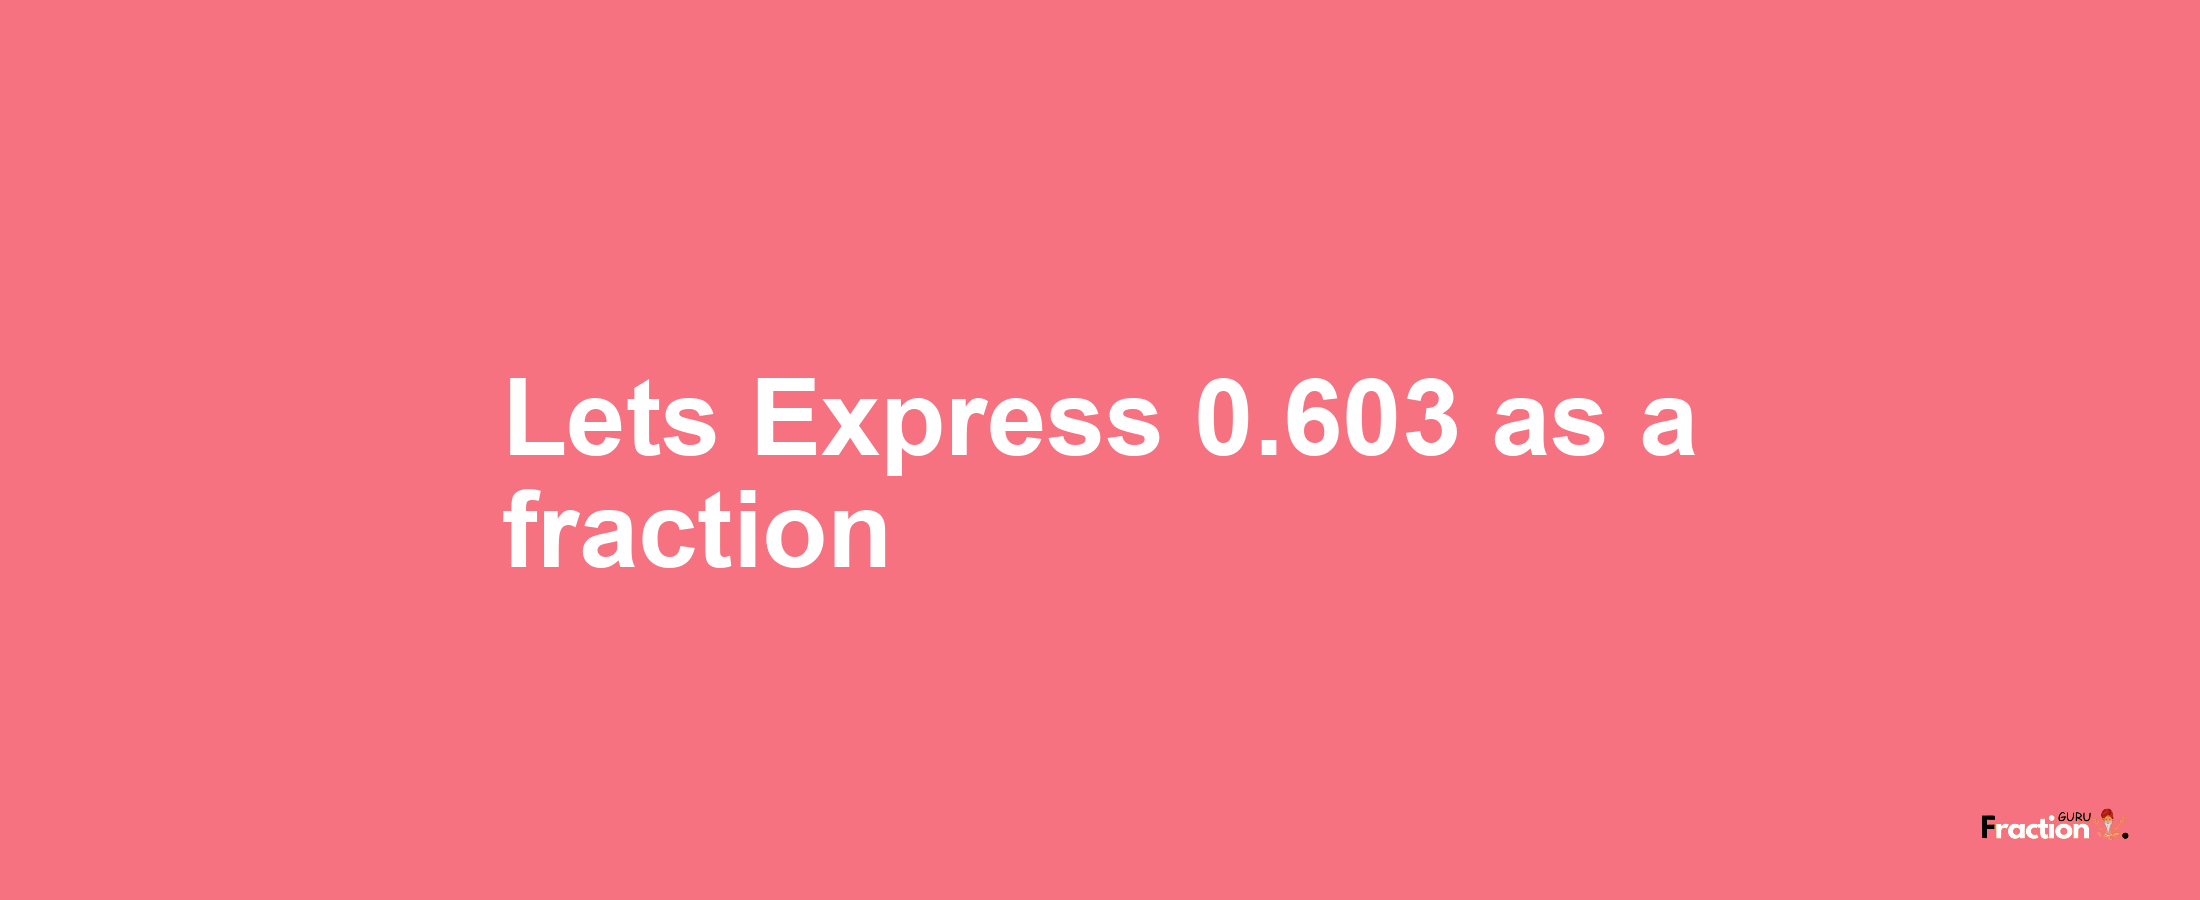 Lets Express 0.603 as afraction